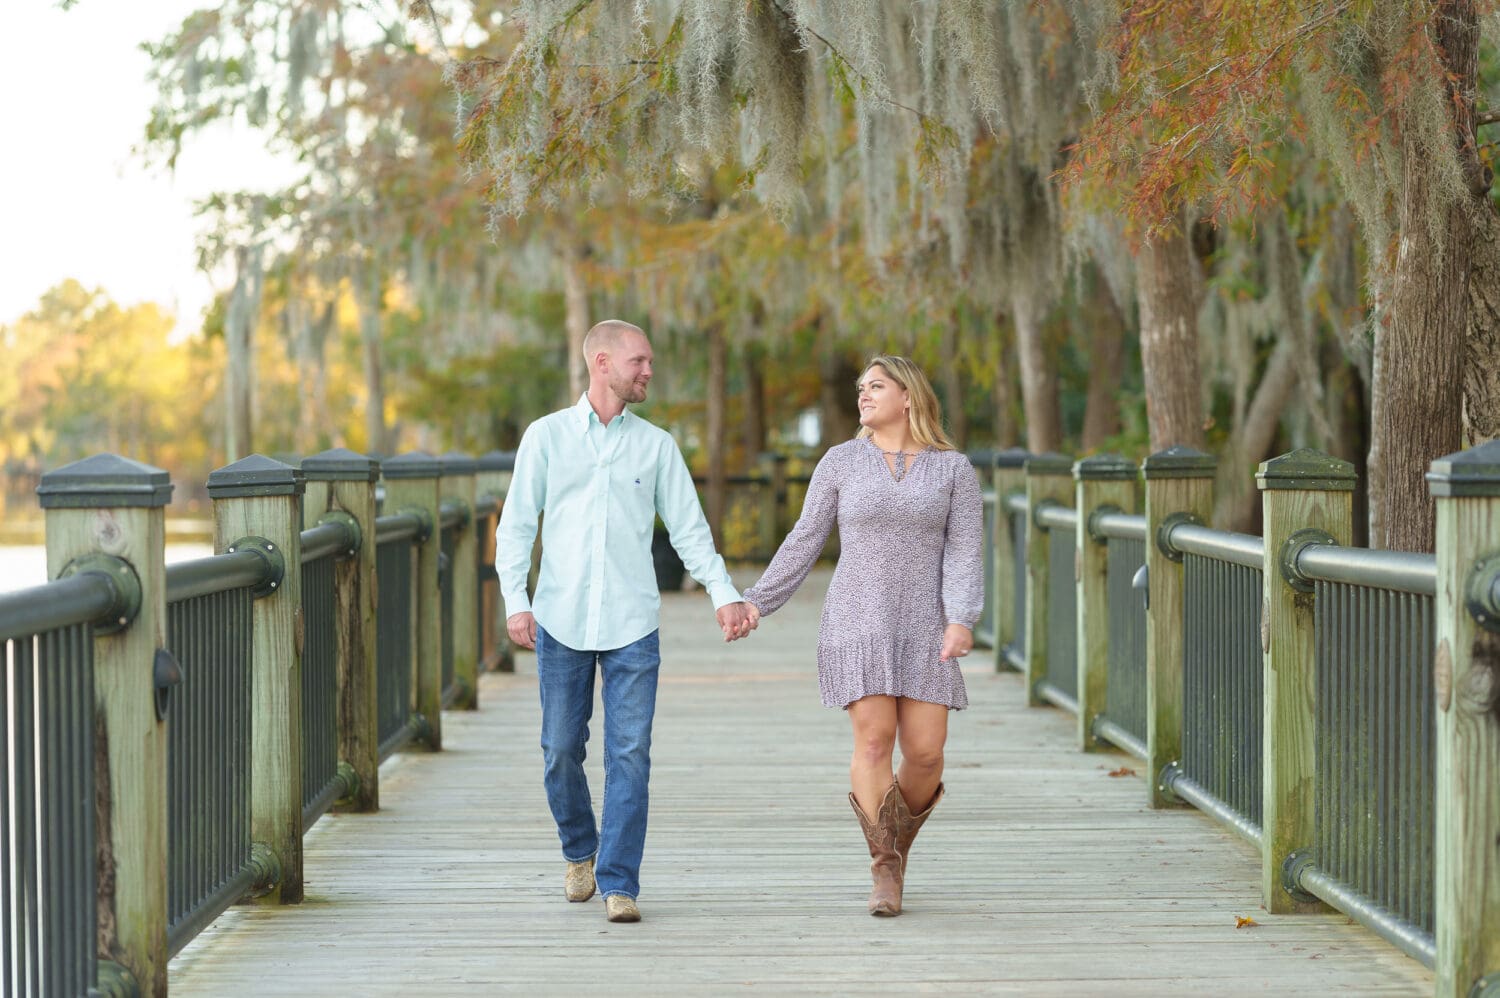 Engagement portraits for my friends from Crossfit with cowboy boots by the Waccamaw River - Conway River Walk